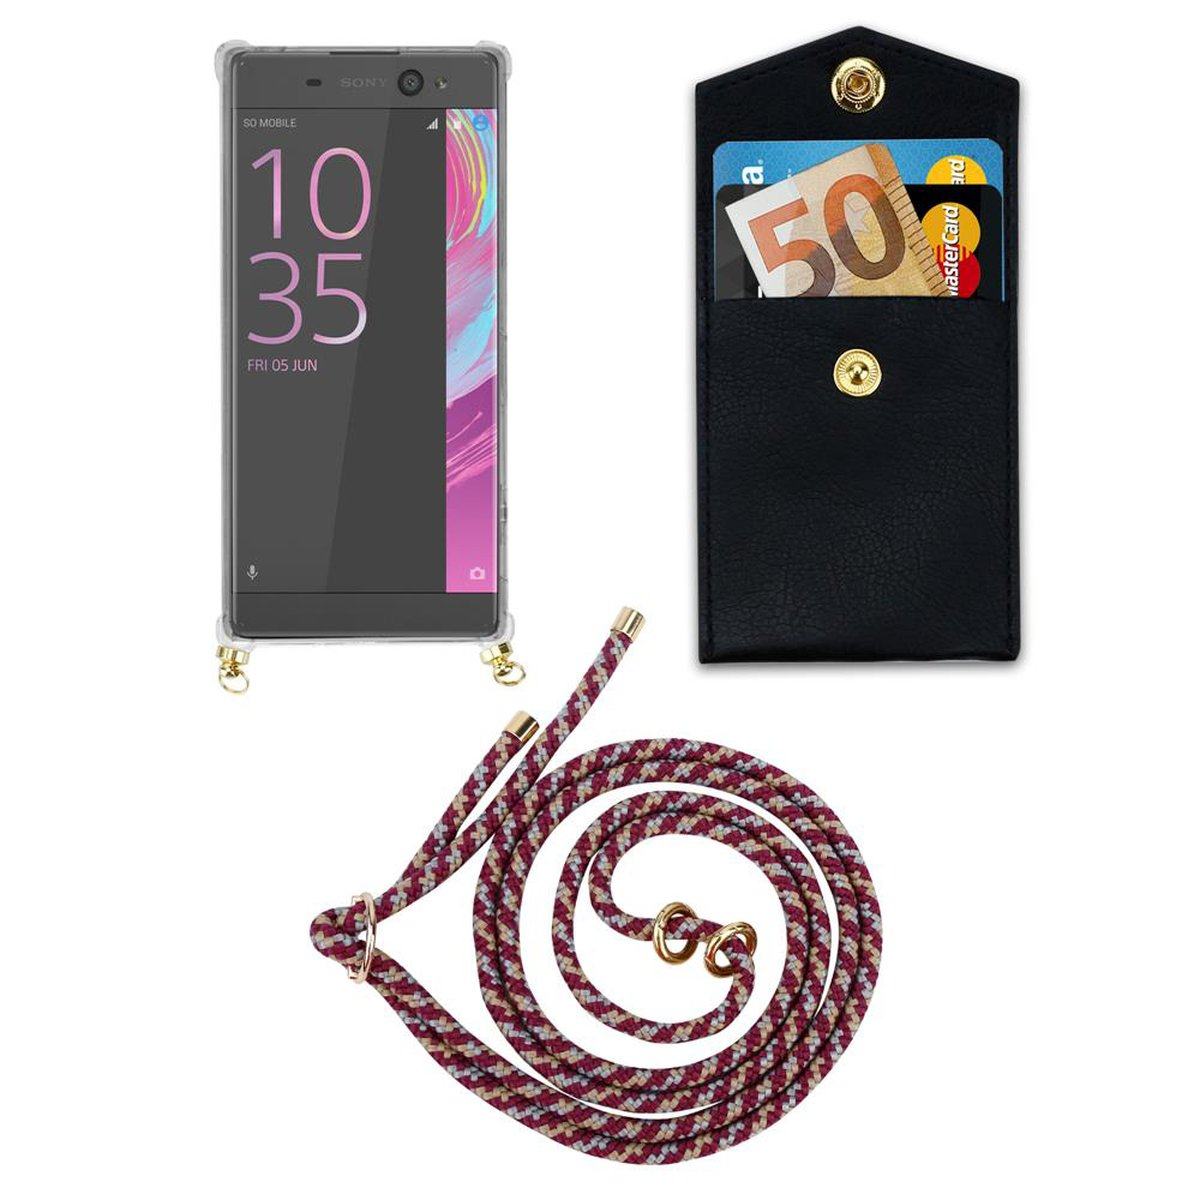 Kordel abnehmbarer Band Ringen, CADORABO Backcover, und Sony, Hülle, WEIß Gold XA, Xperia ROT GELB Kette Handy mit